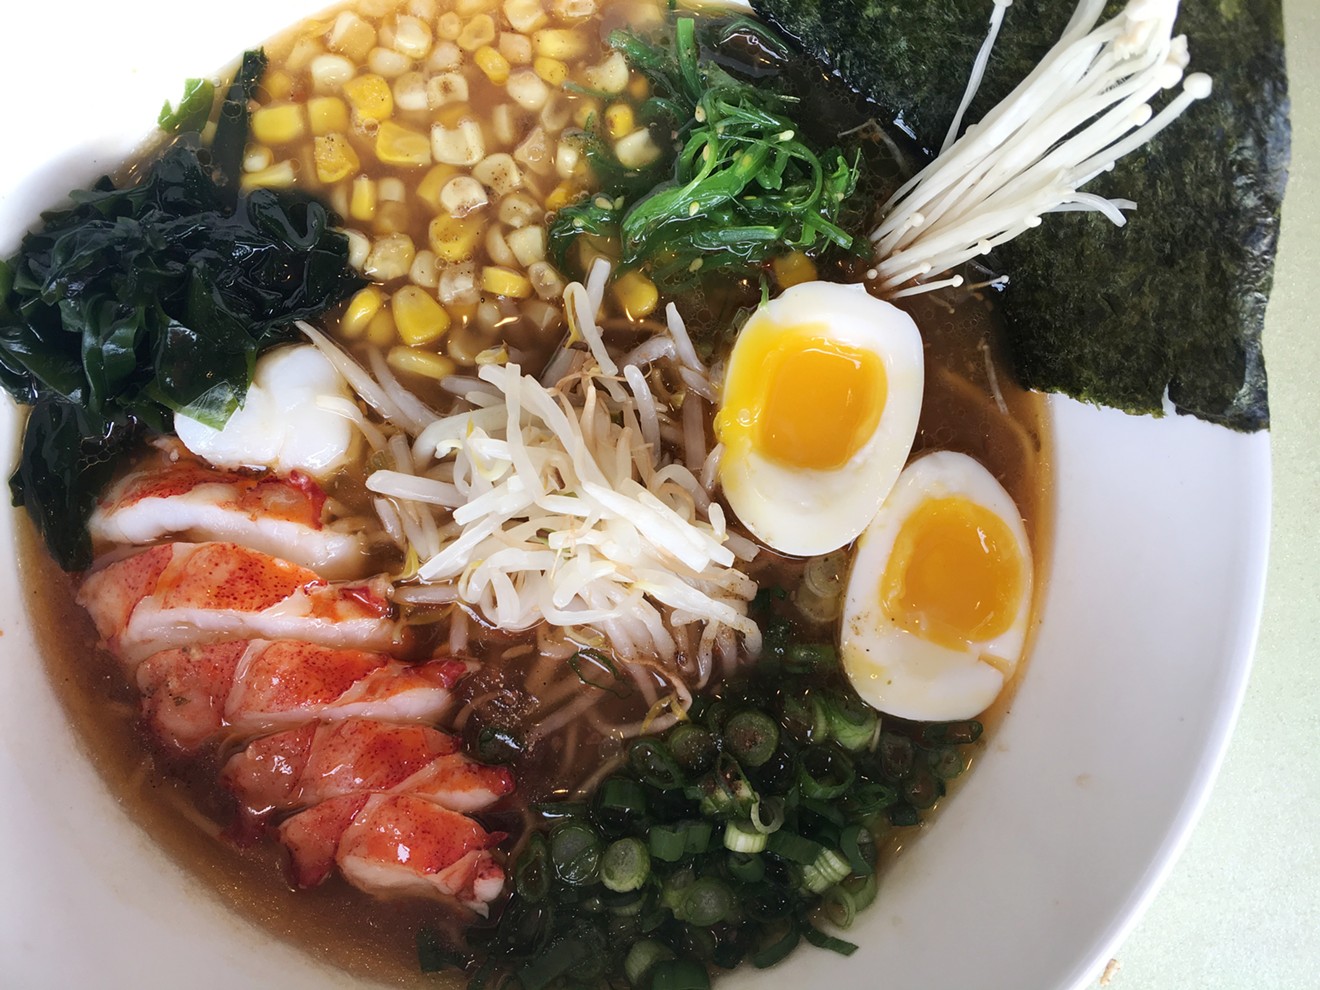 Chimera's lobster ramen is one of four styles on the menu that contain housemade noodles.